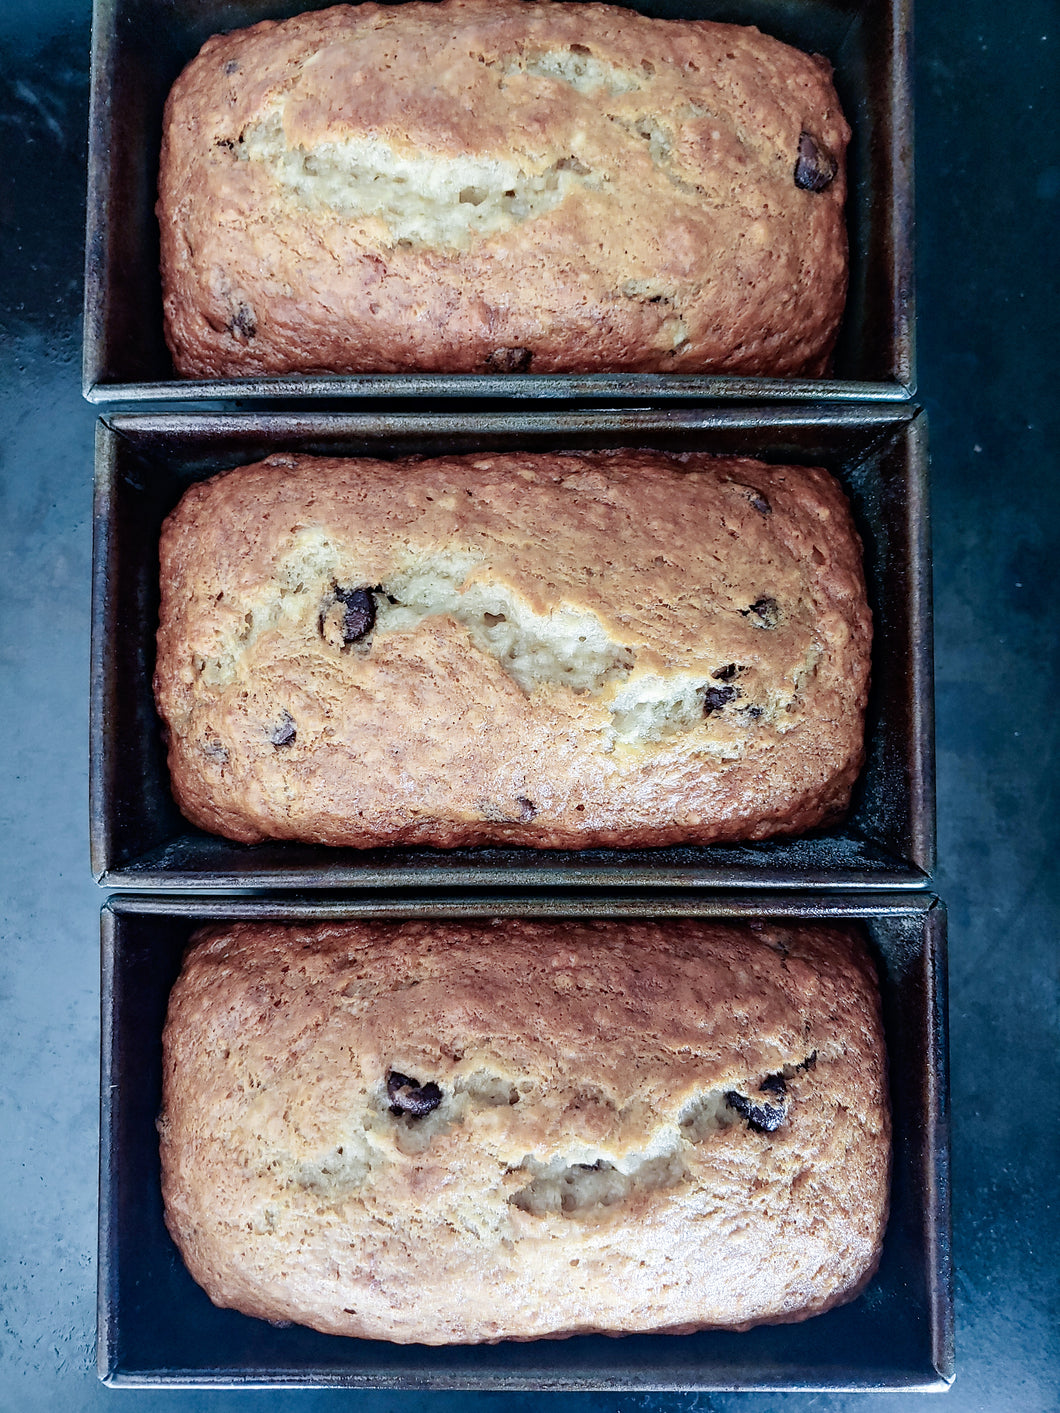 Three loaves of chocolate chip banana bread in baking trays.